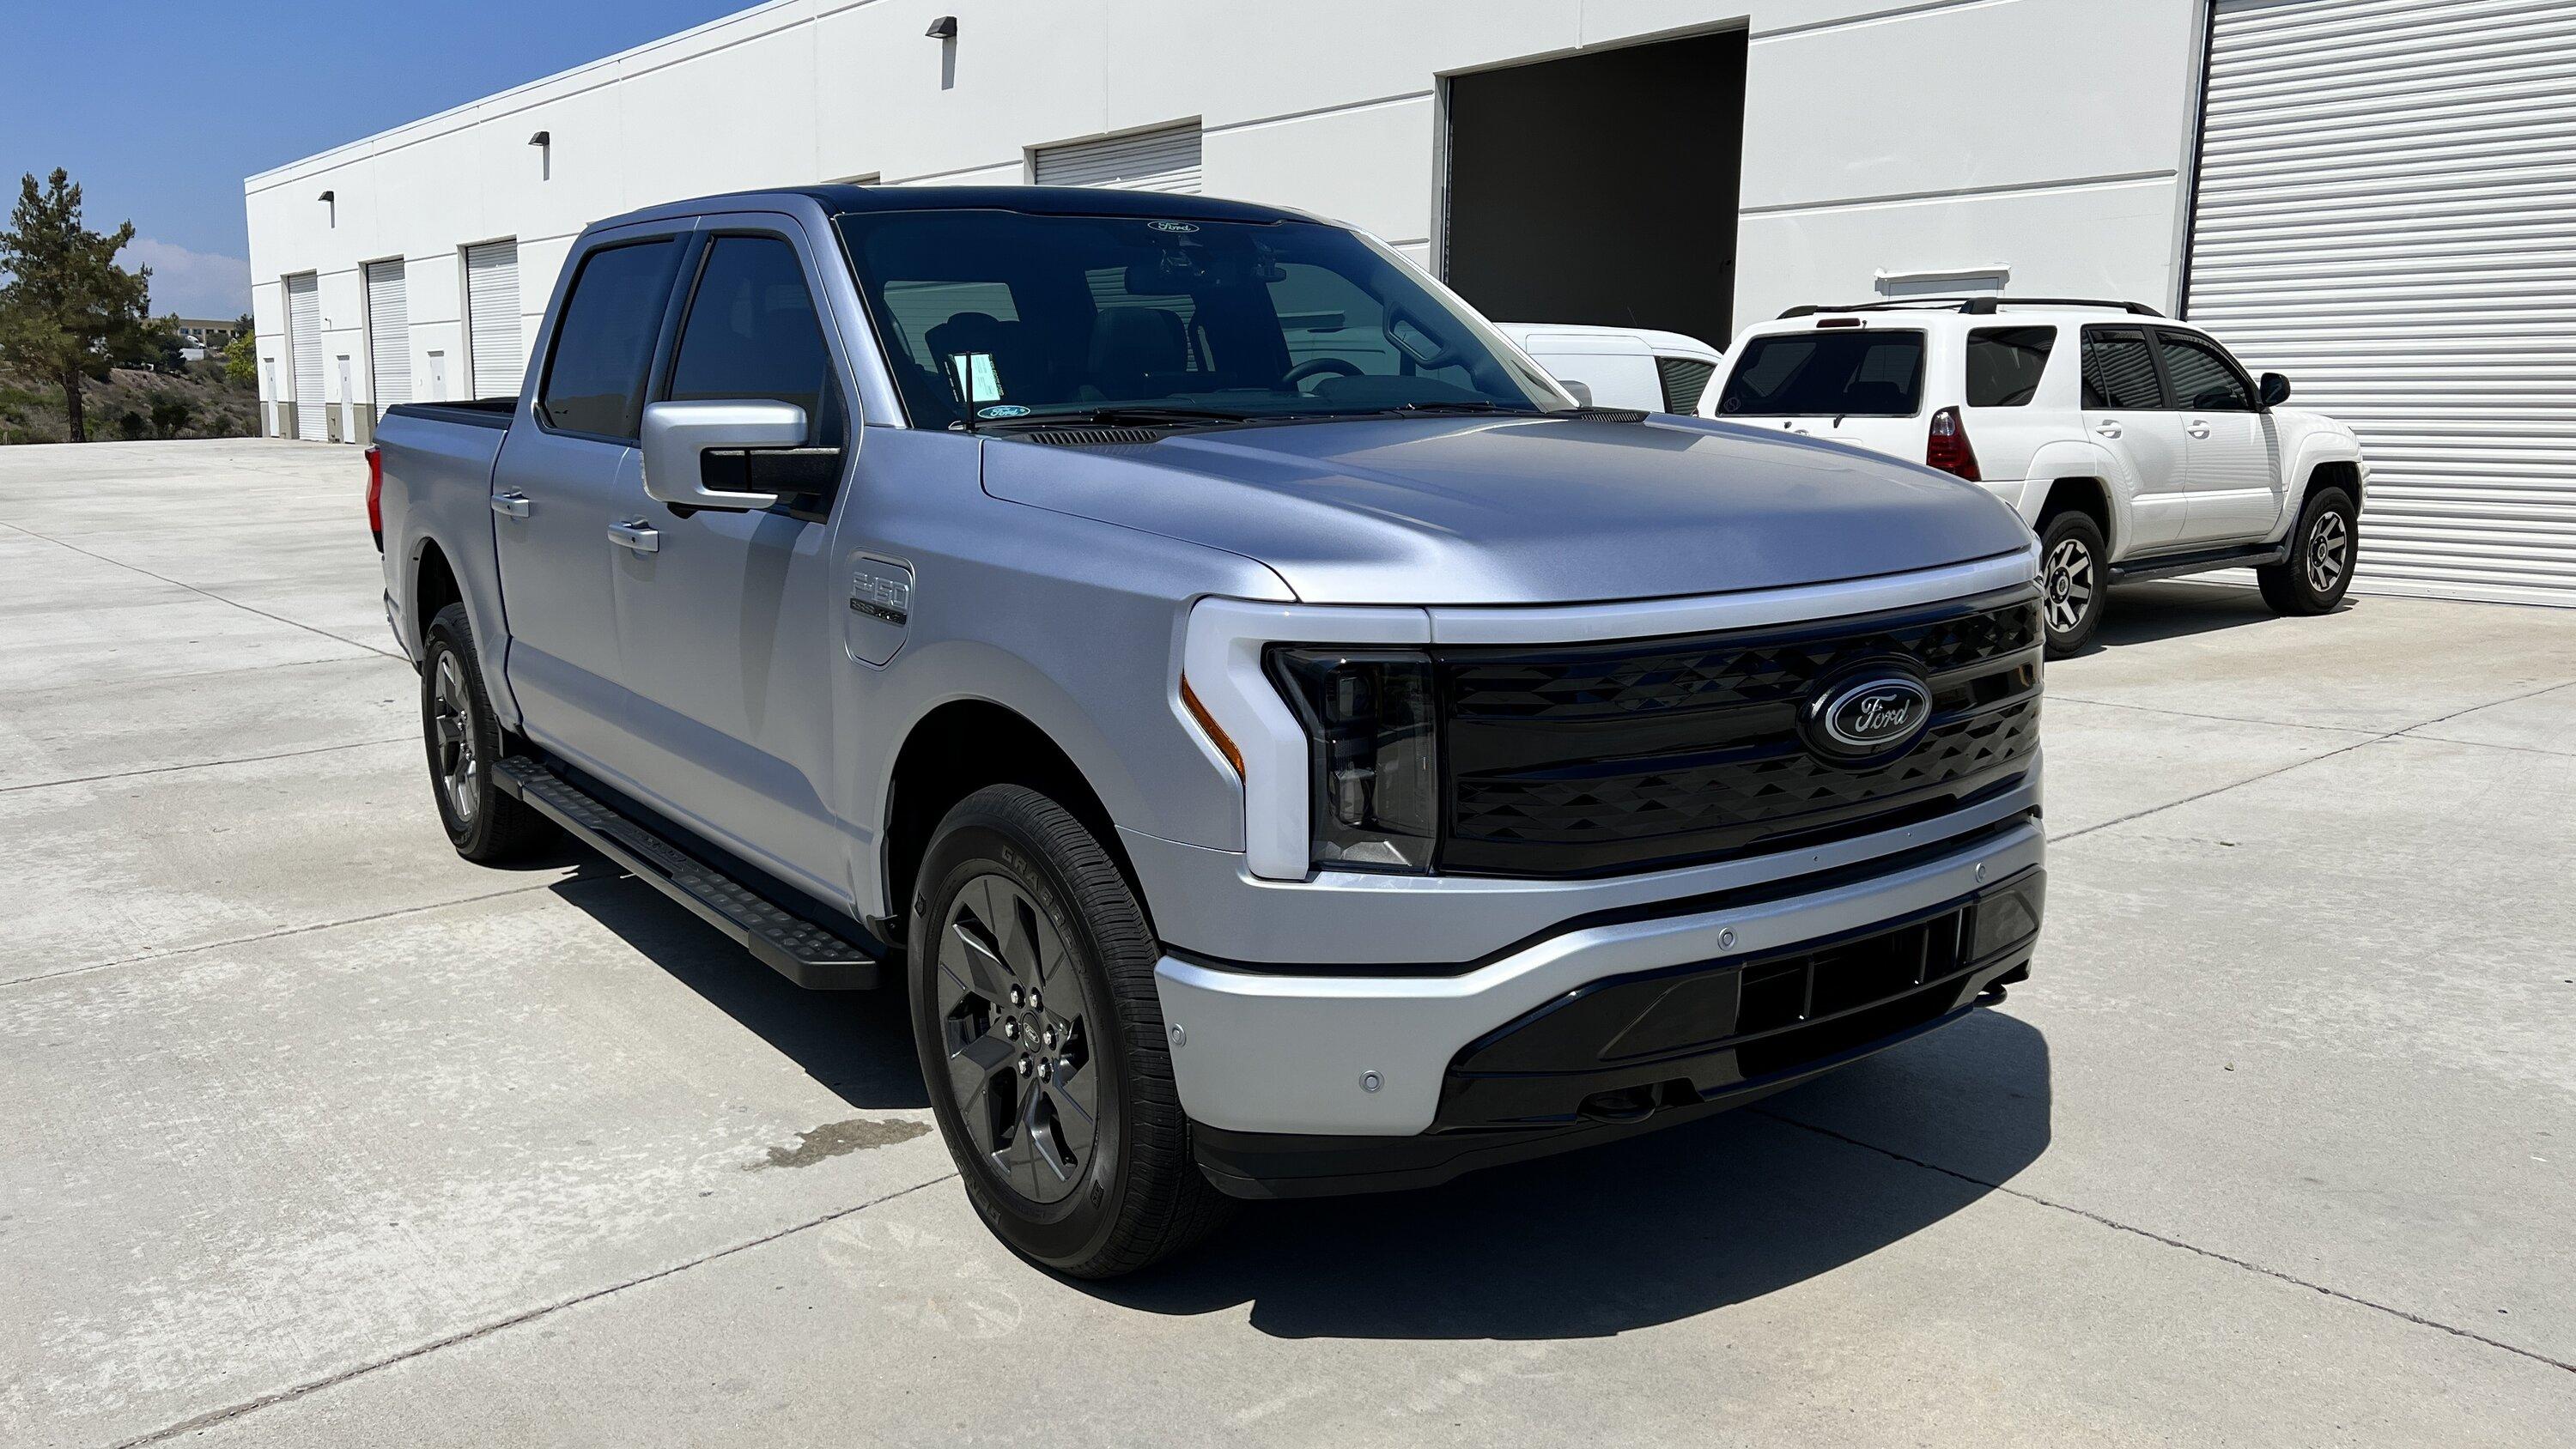 Ford F-150 Lightning Iced Blue Silver Lightning Build. Mods: PPF matte finish, Line-X, gloss black painted grille, black wrapped roof, wheels d3092faa-c361-438f-bd28-99c9cbf5c2ad-jpe